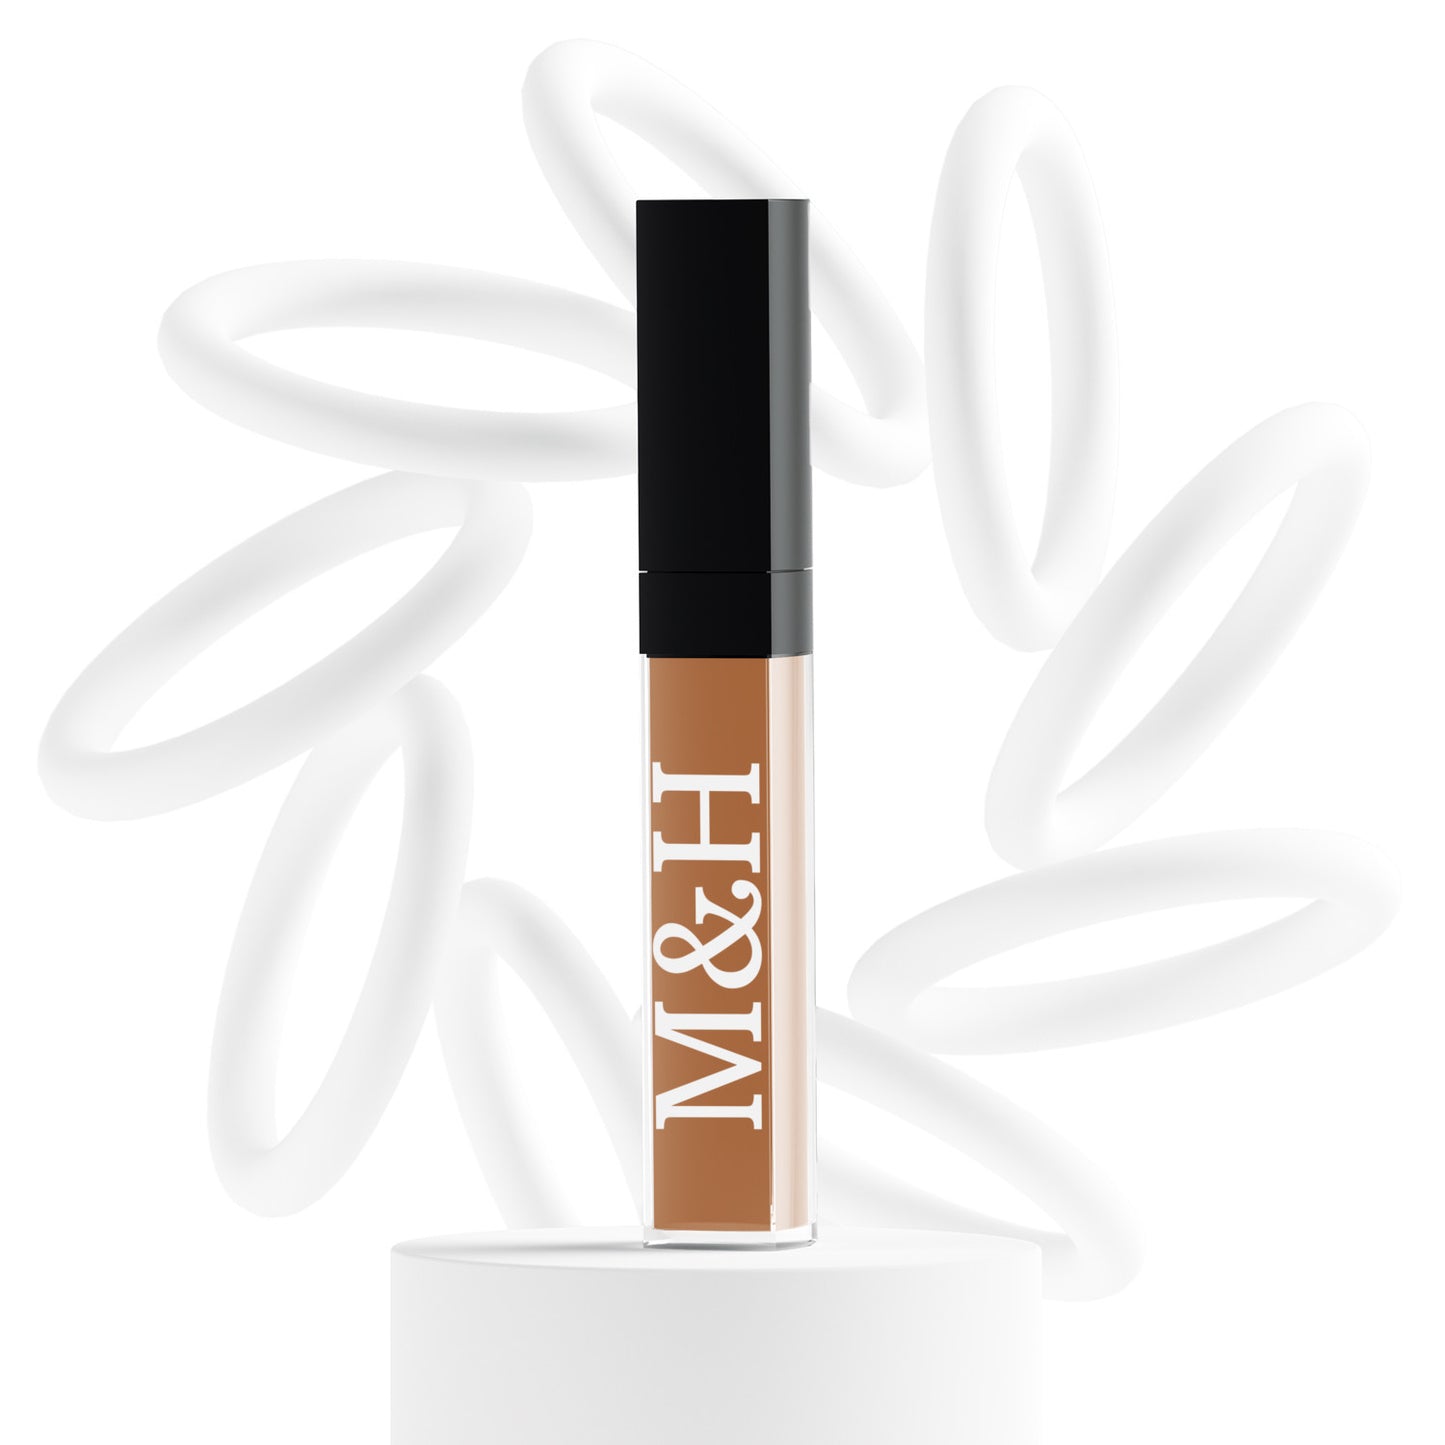 Warm-tone concealersM&H Fashionconcealer-warmM&H Fashion
This multifunctional concealer is designed to cover under-eye circles, complexion alterations, and major imperfections like scars, hyperpigmentation, burns, and tatWarm-tone concealers